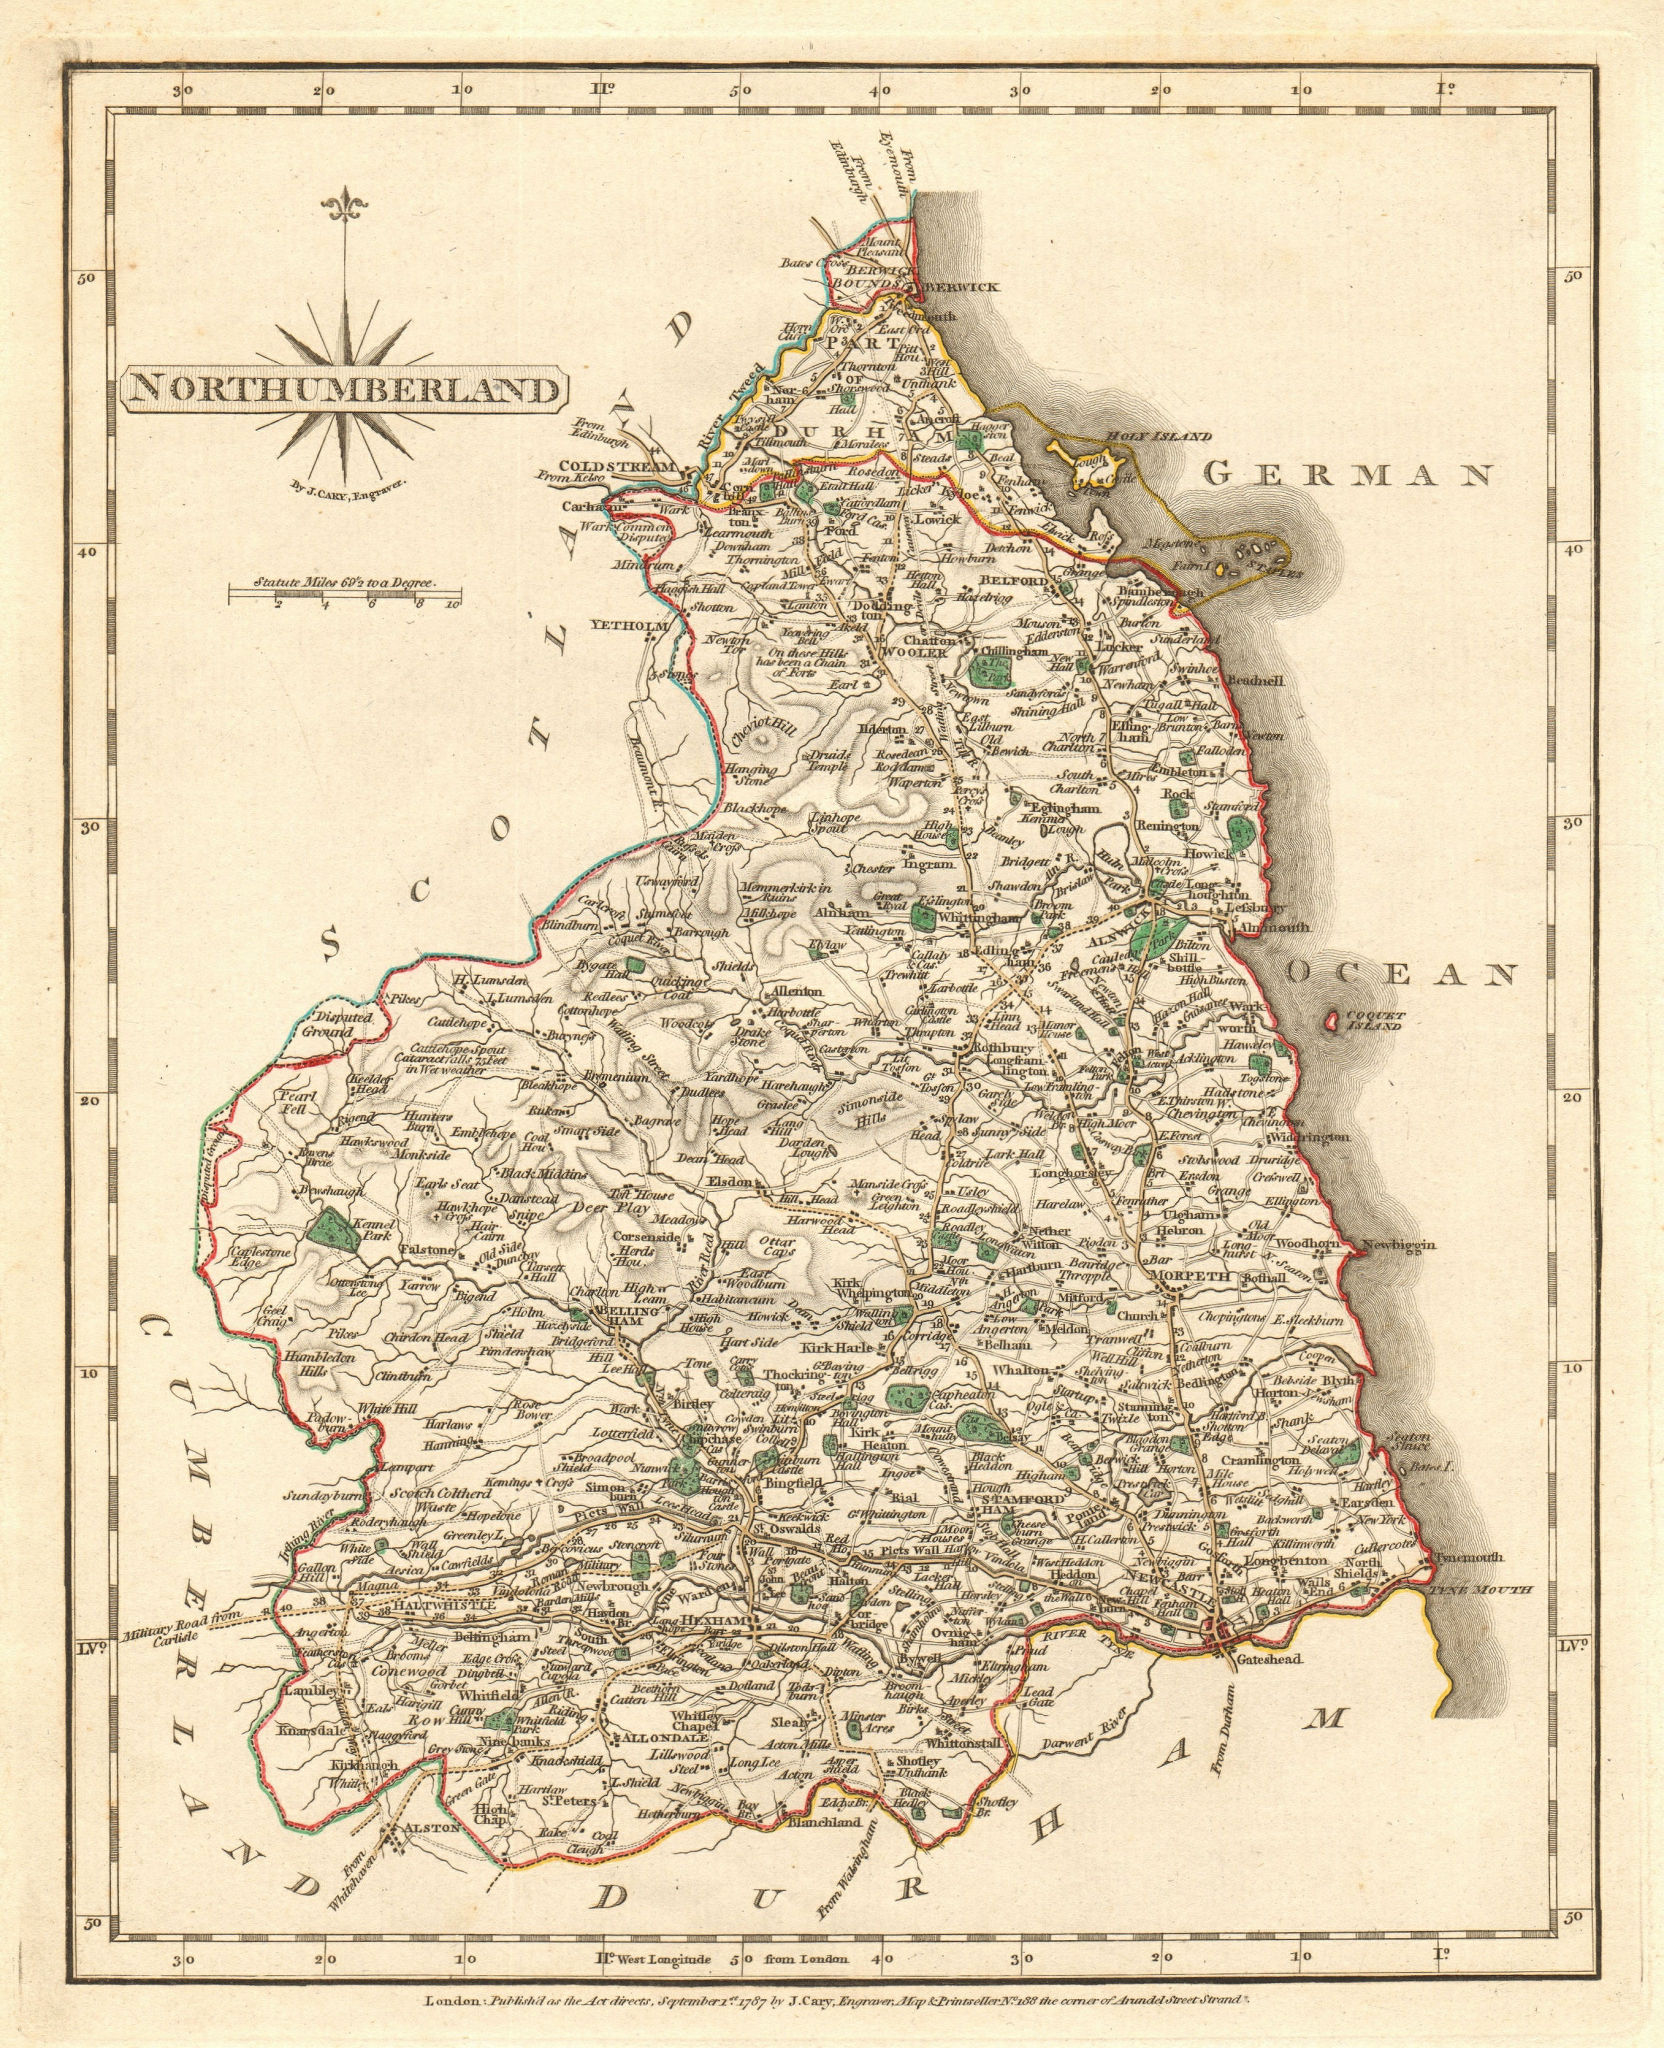 Associate Product Antique county map of NORTHUMBERLAND by JOHN CARY. Original outline colour 1787